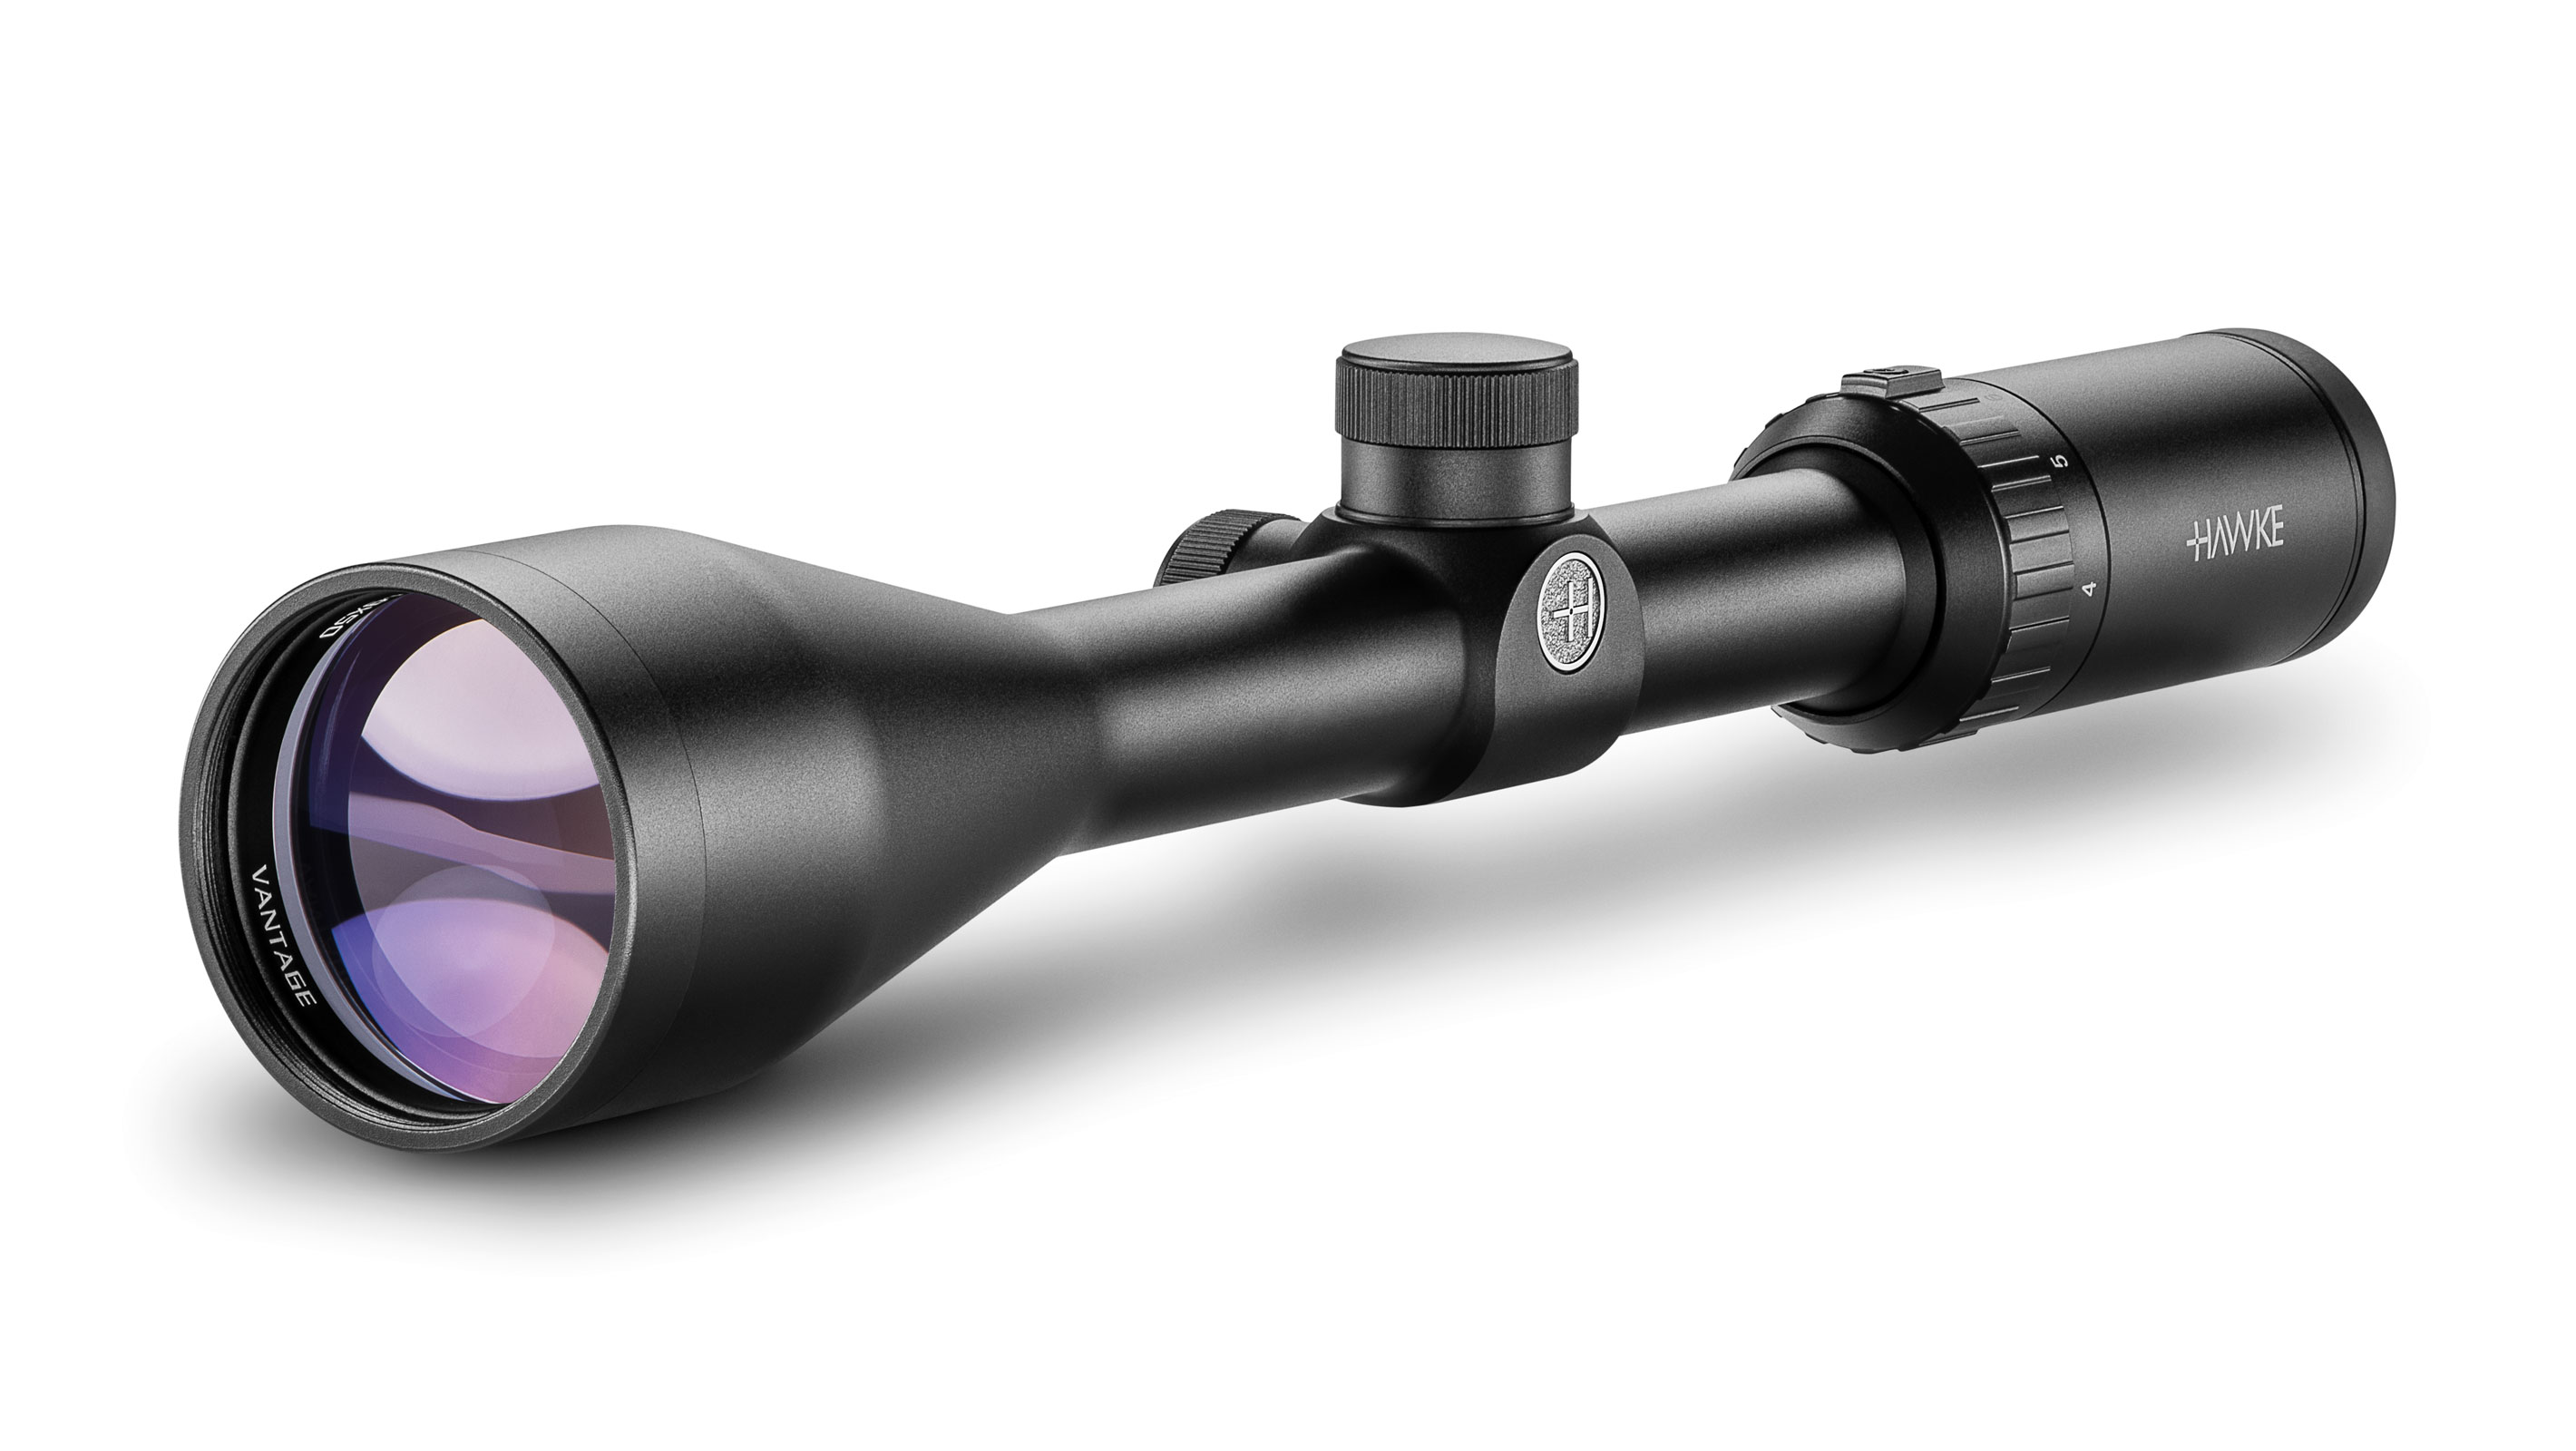 Objective End View Of The Hawke Vantage 4-12x50 30/30 Duplex Rifle Scope